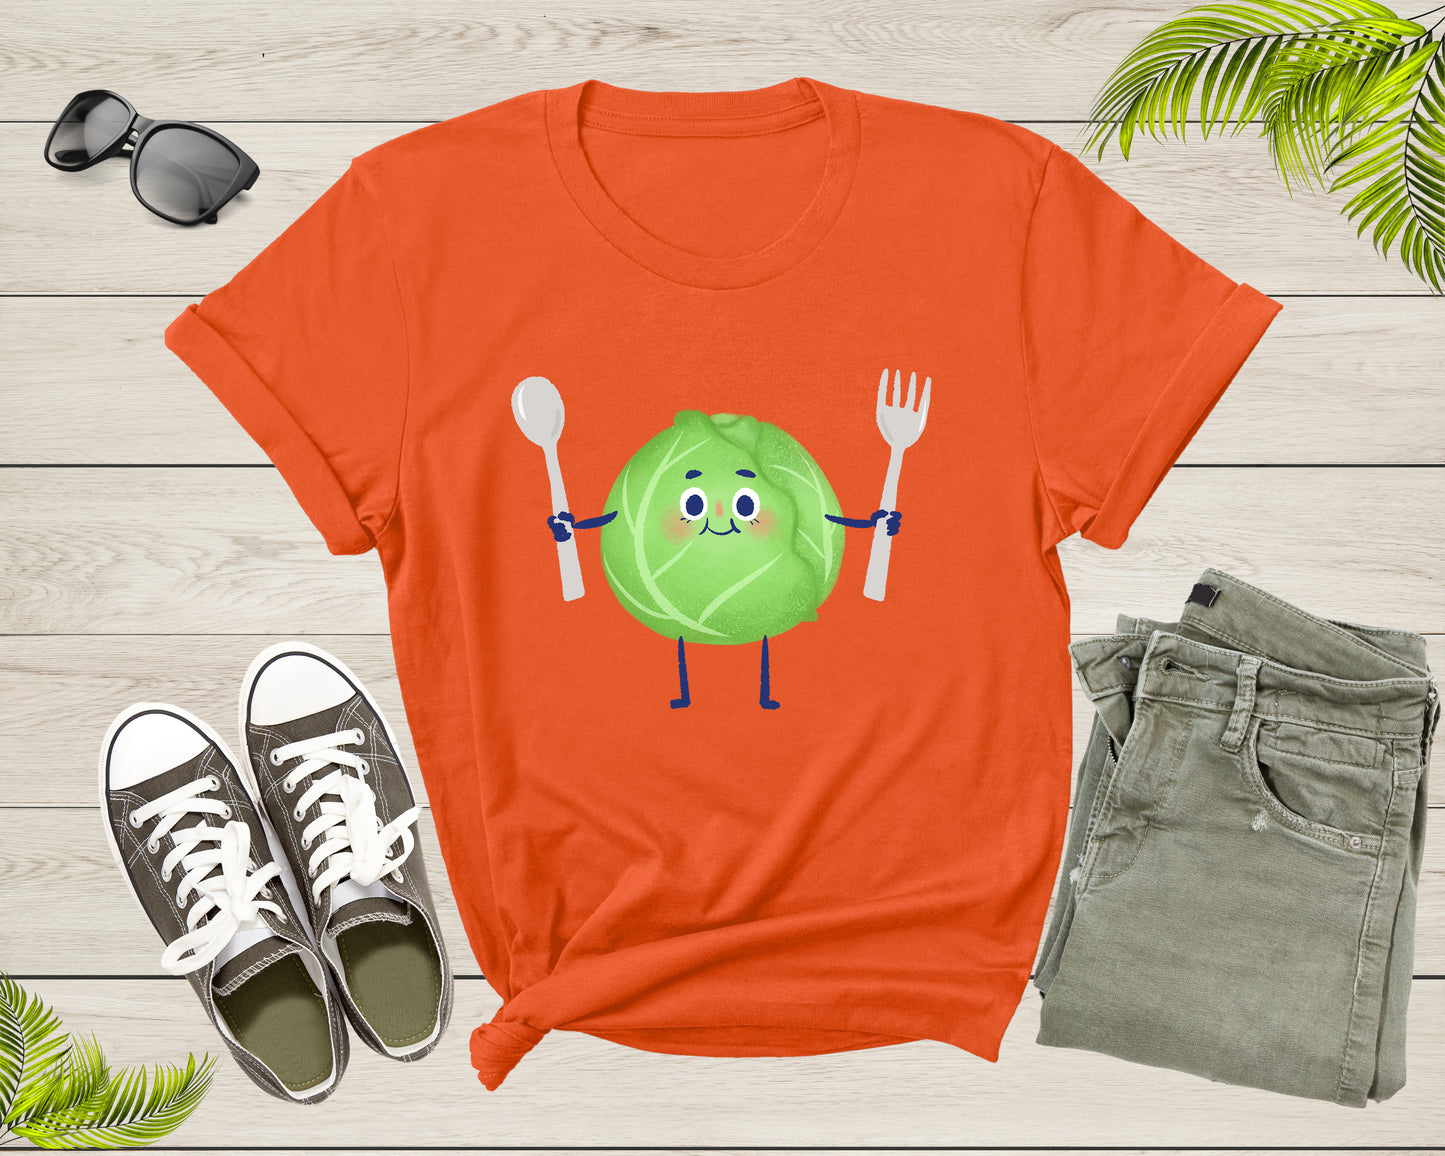 Cute Green Cabbage Vegetable Holding Fork and Spoon Standing T-Shirt Cabbage Lover Gift T Shirt for Men Women Kids Boys Girls Graphic Tshirt